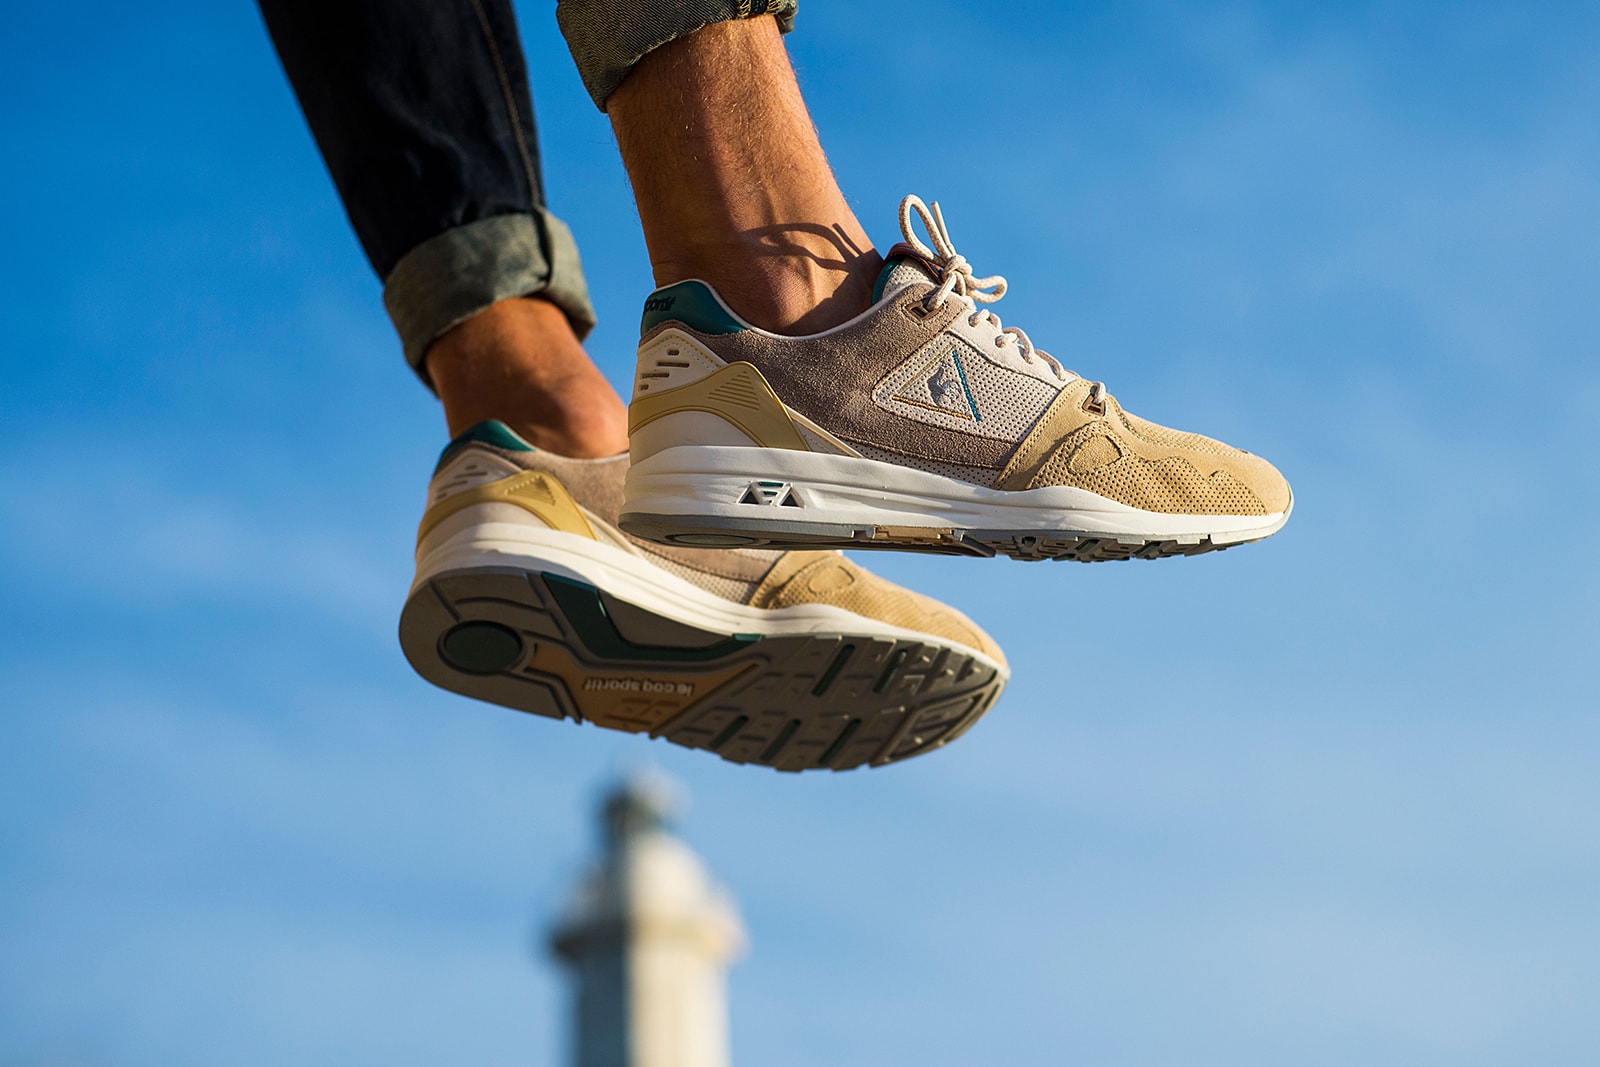 Sneakers76 x Le Coq Sportif LCS R1000 "Guardian of the Sea"